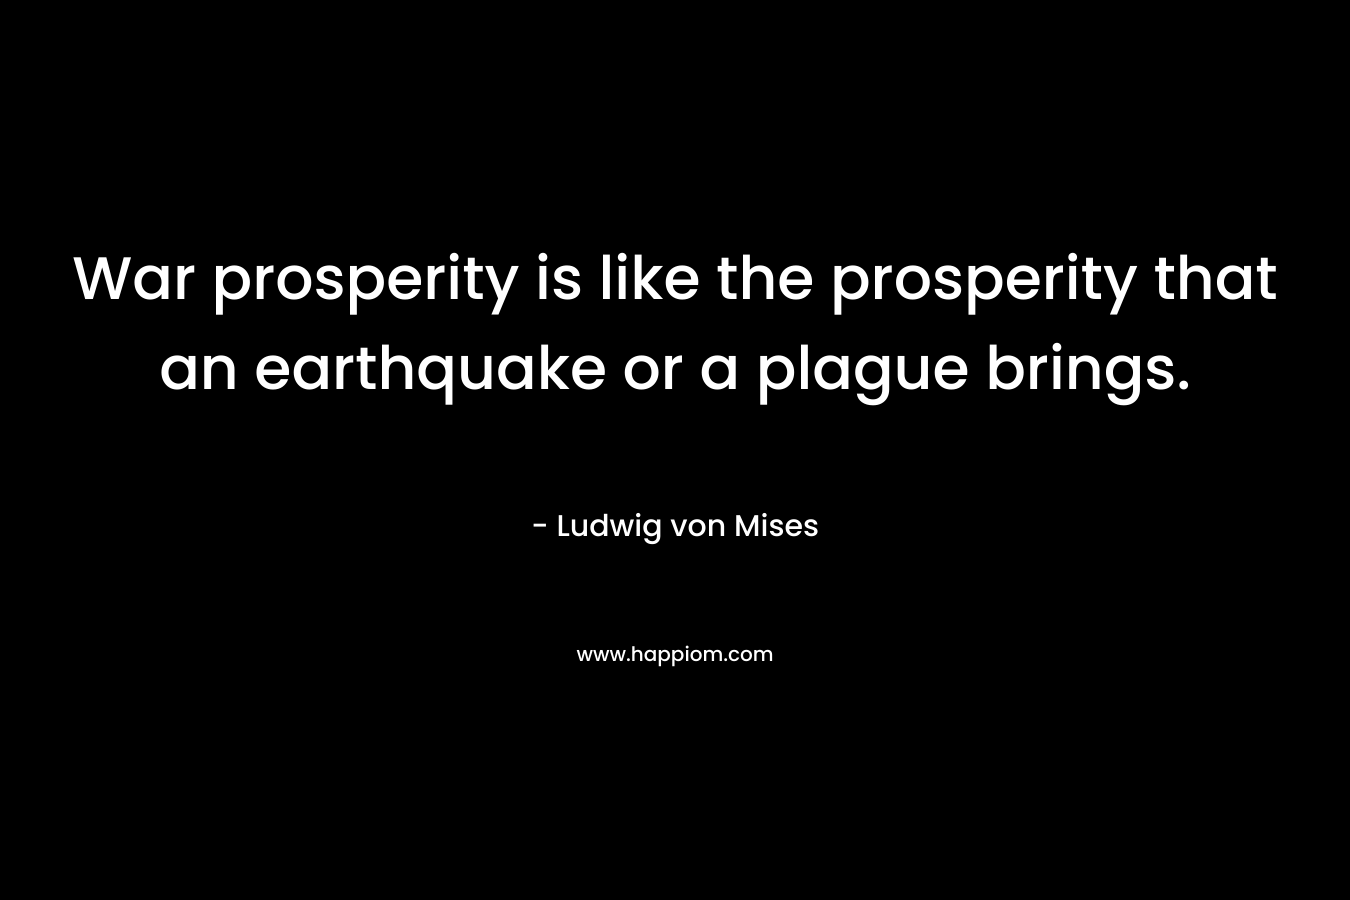 War prosperity is like the prosperity that an earthquake or a plague brings. – Ludwig von Mises